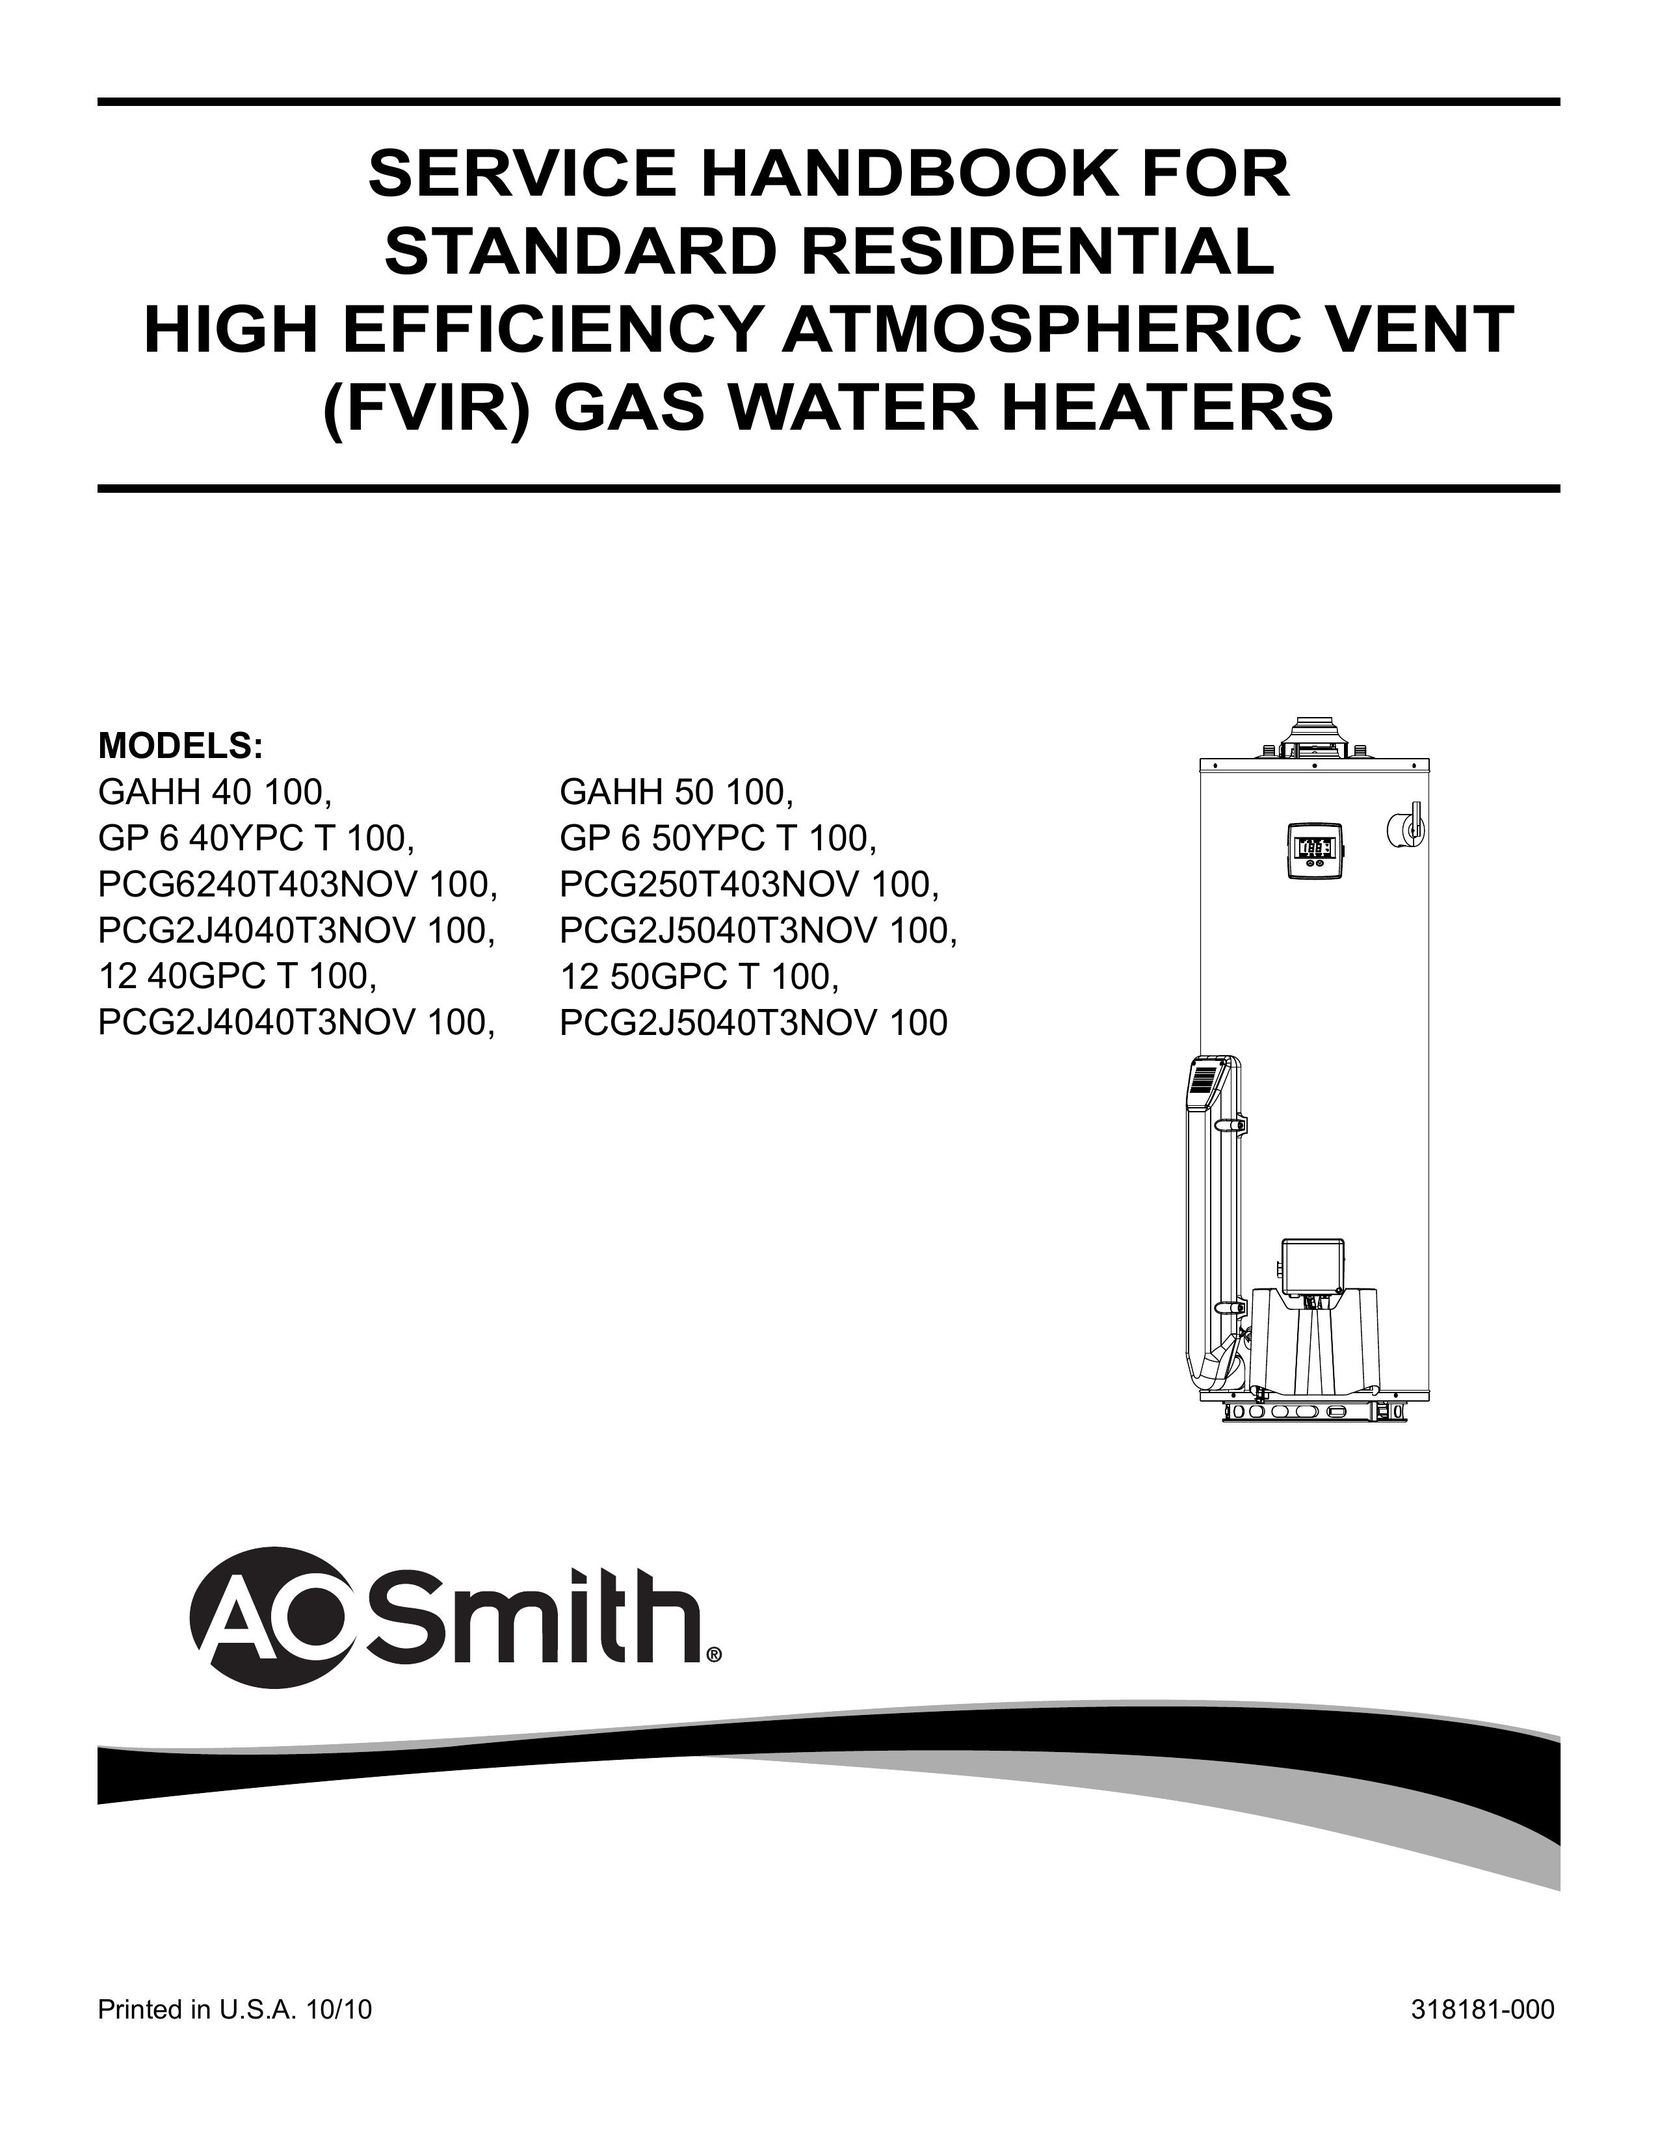 A.O. Smith 12 50GPC T 100 Water Heater User Manual